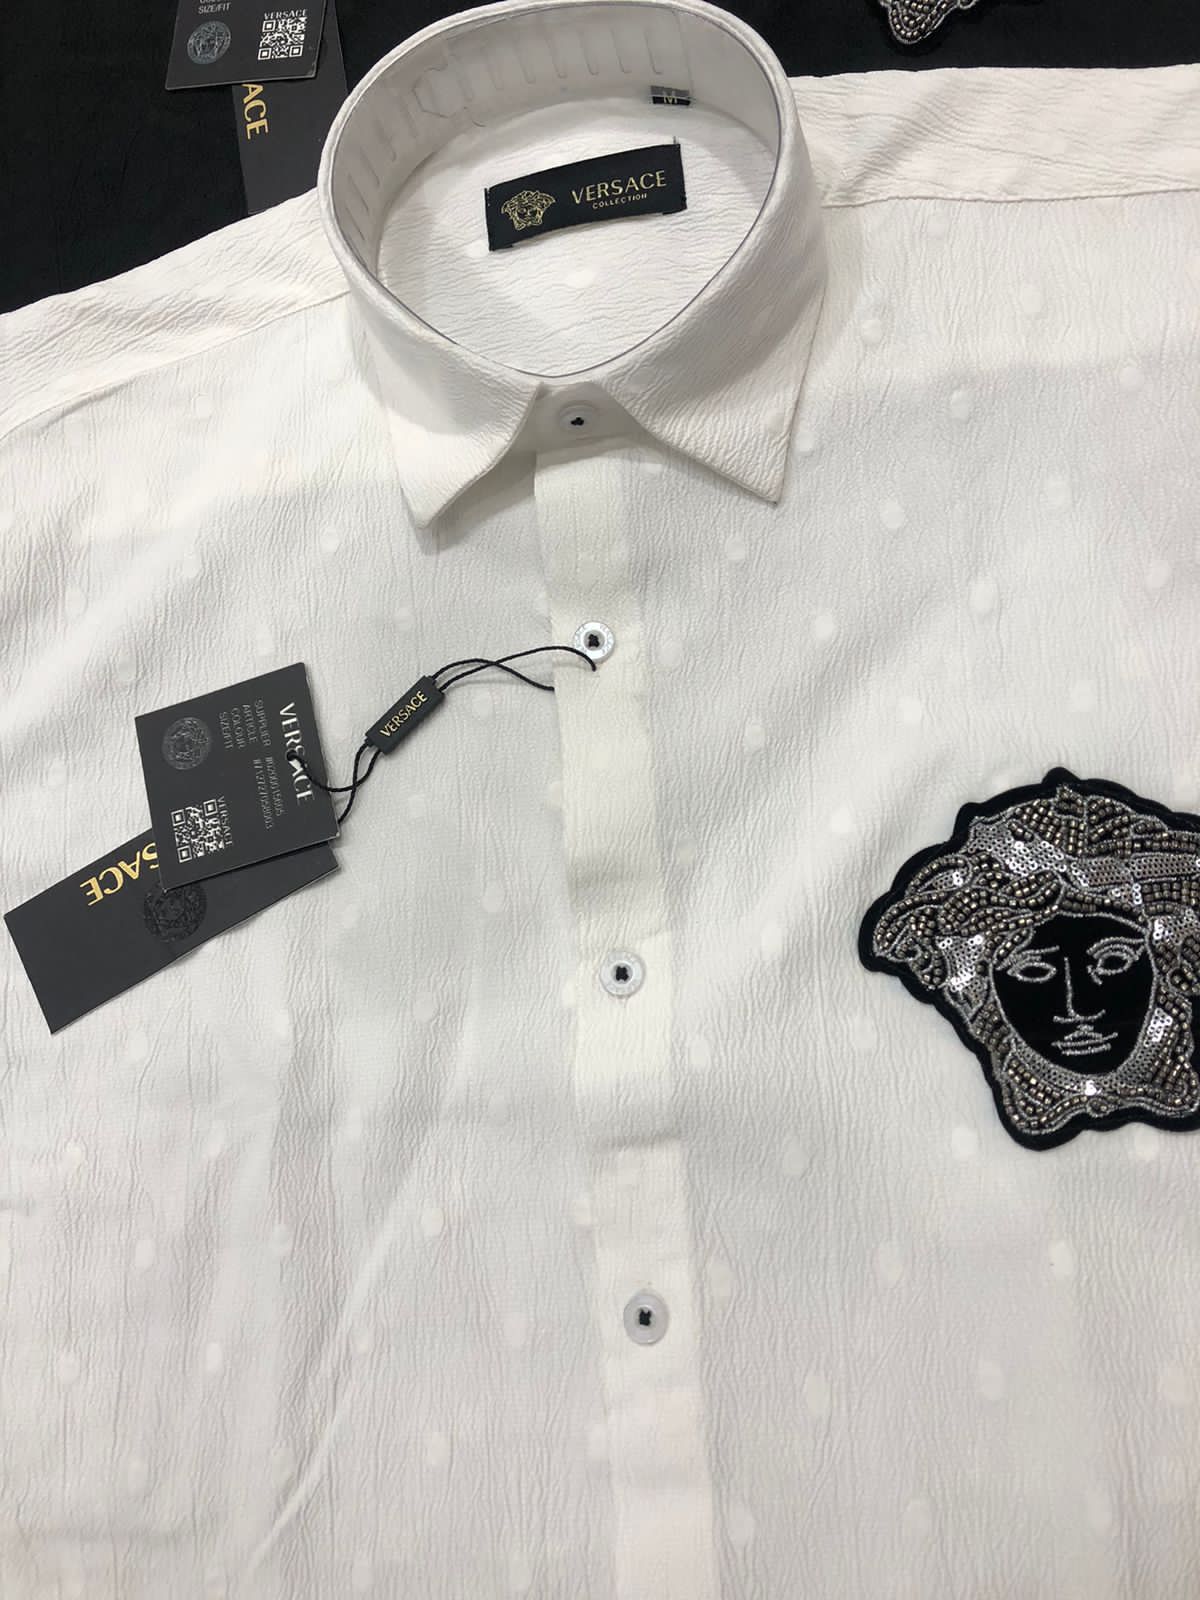 PREMIUM SHIRTS COLLECTION FOR MEN